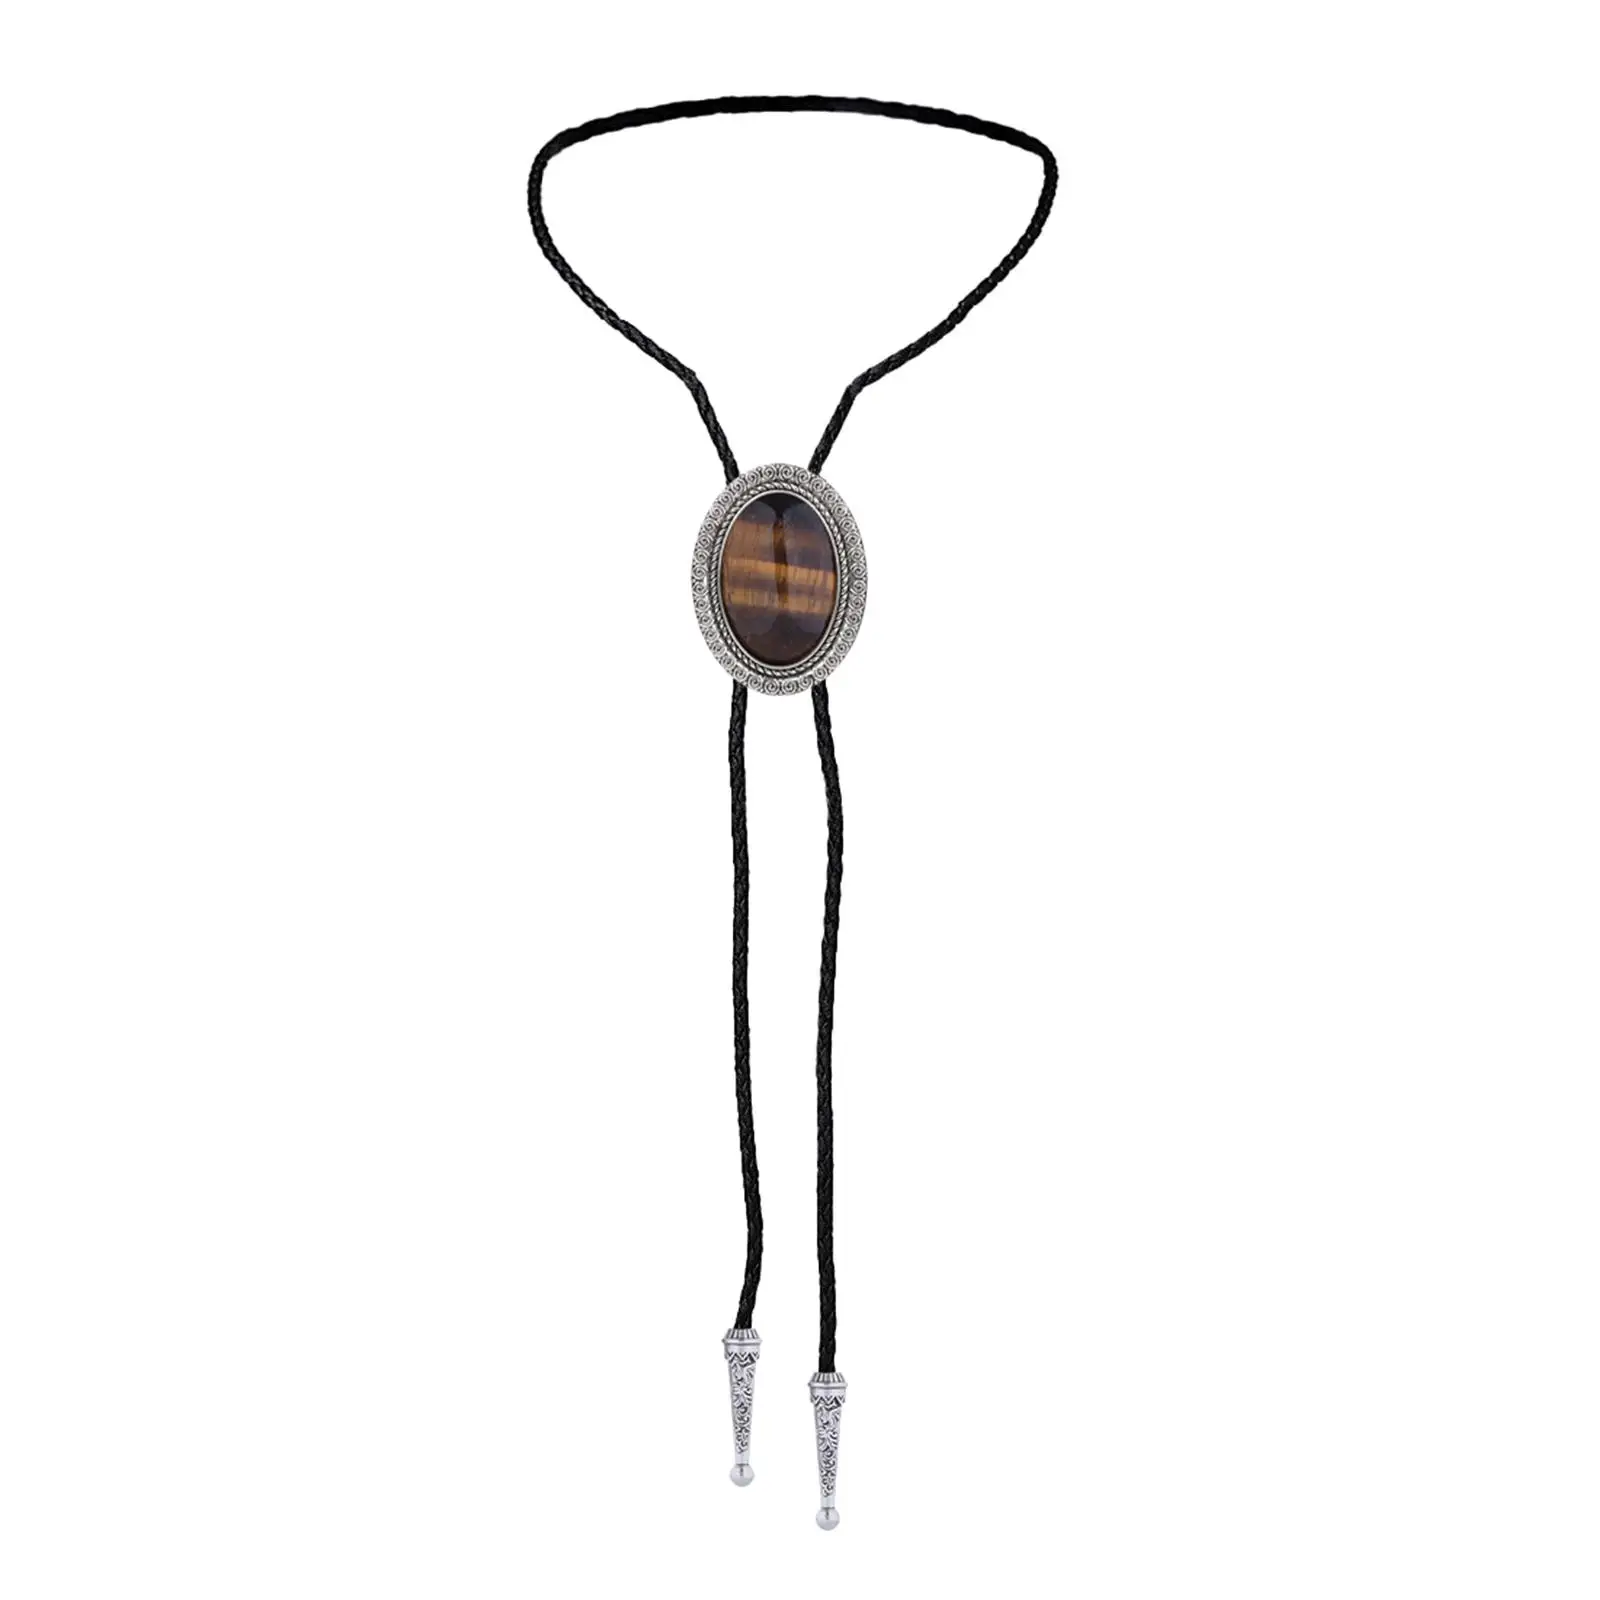 beautymall2017 Bolo Tie for Men Cowboy PU Leather Rope Necklace Neck Rope